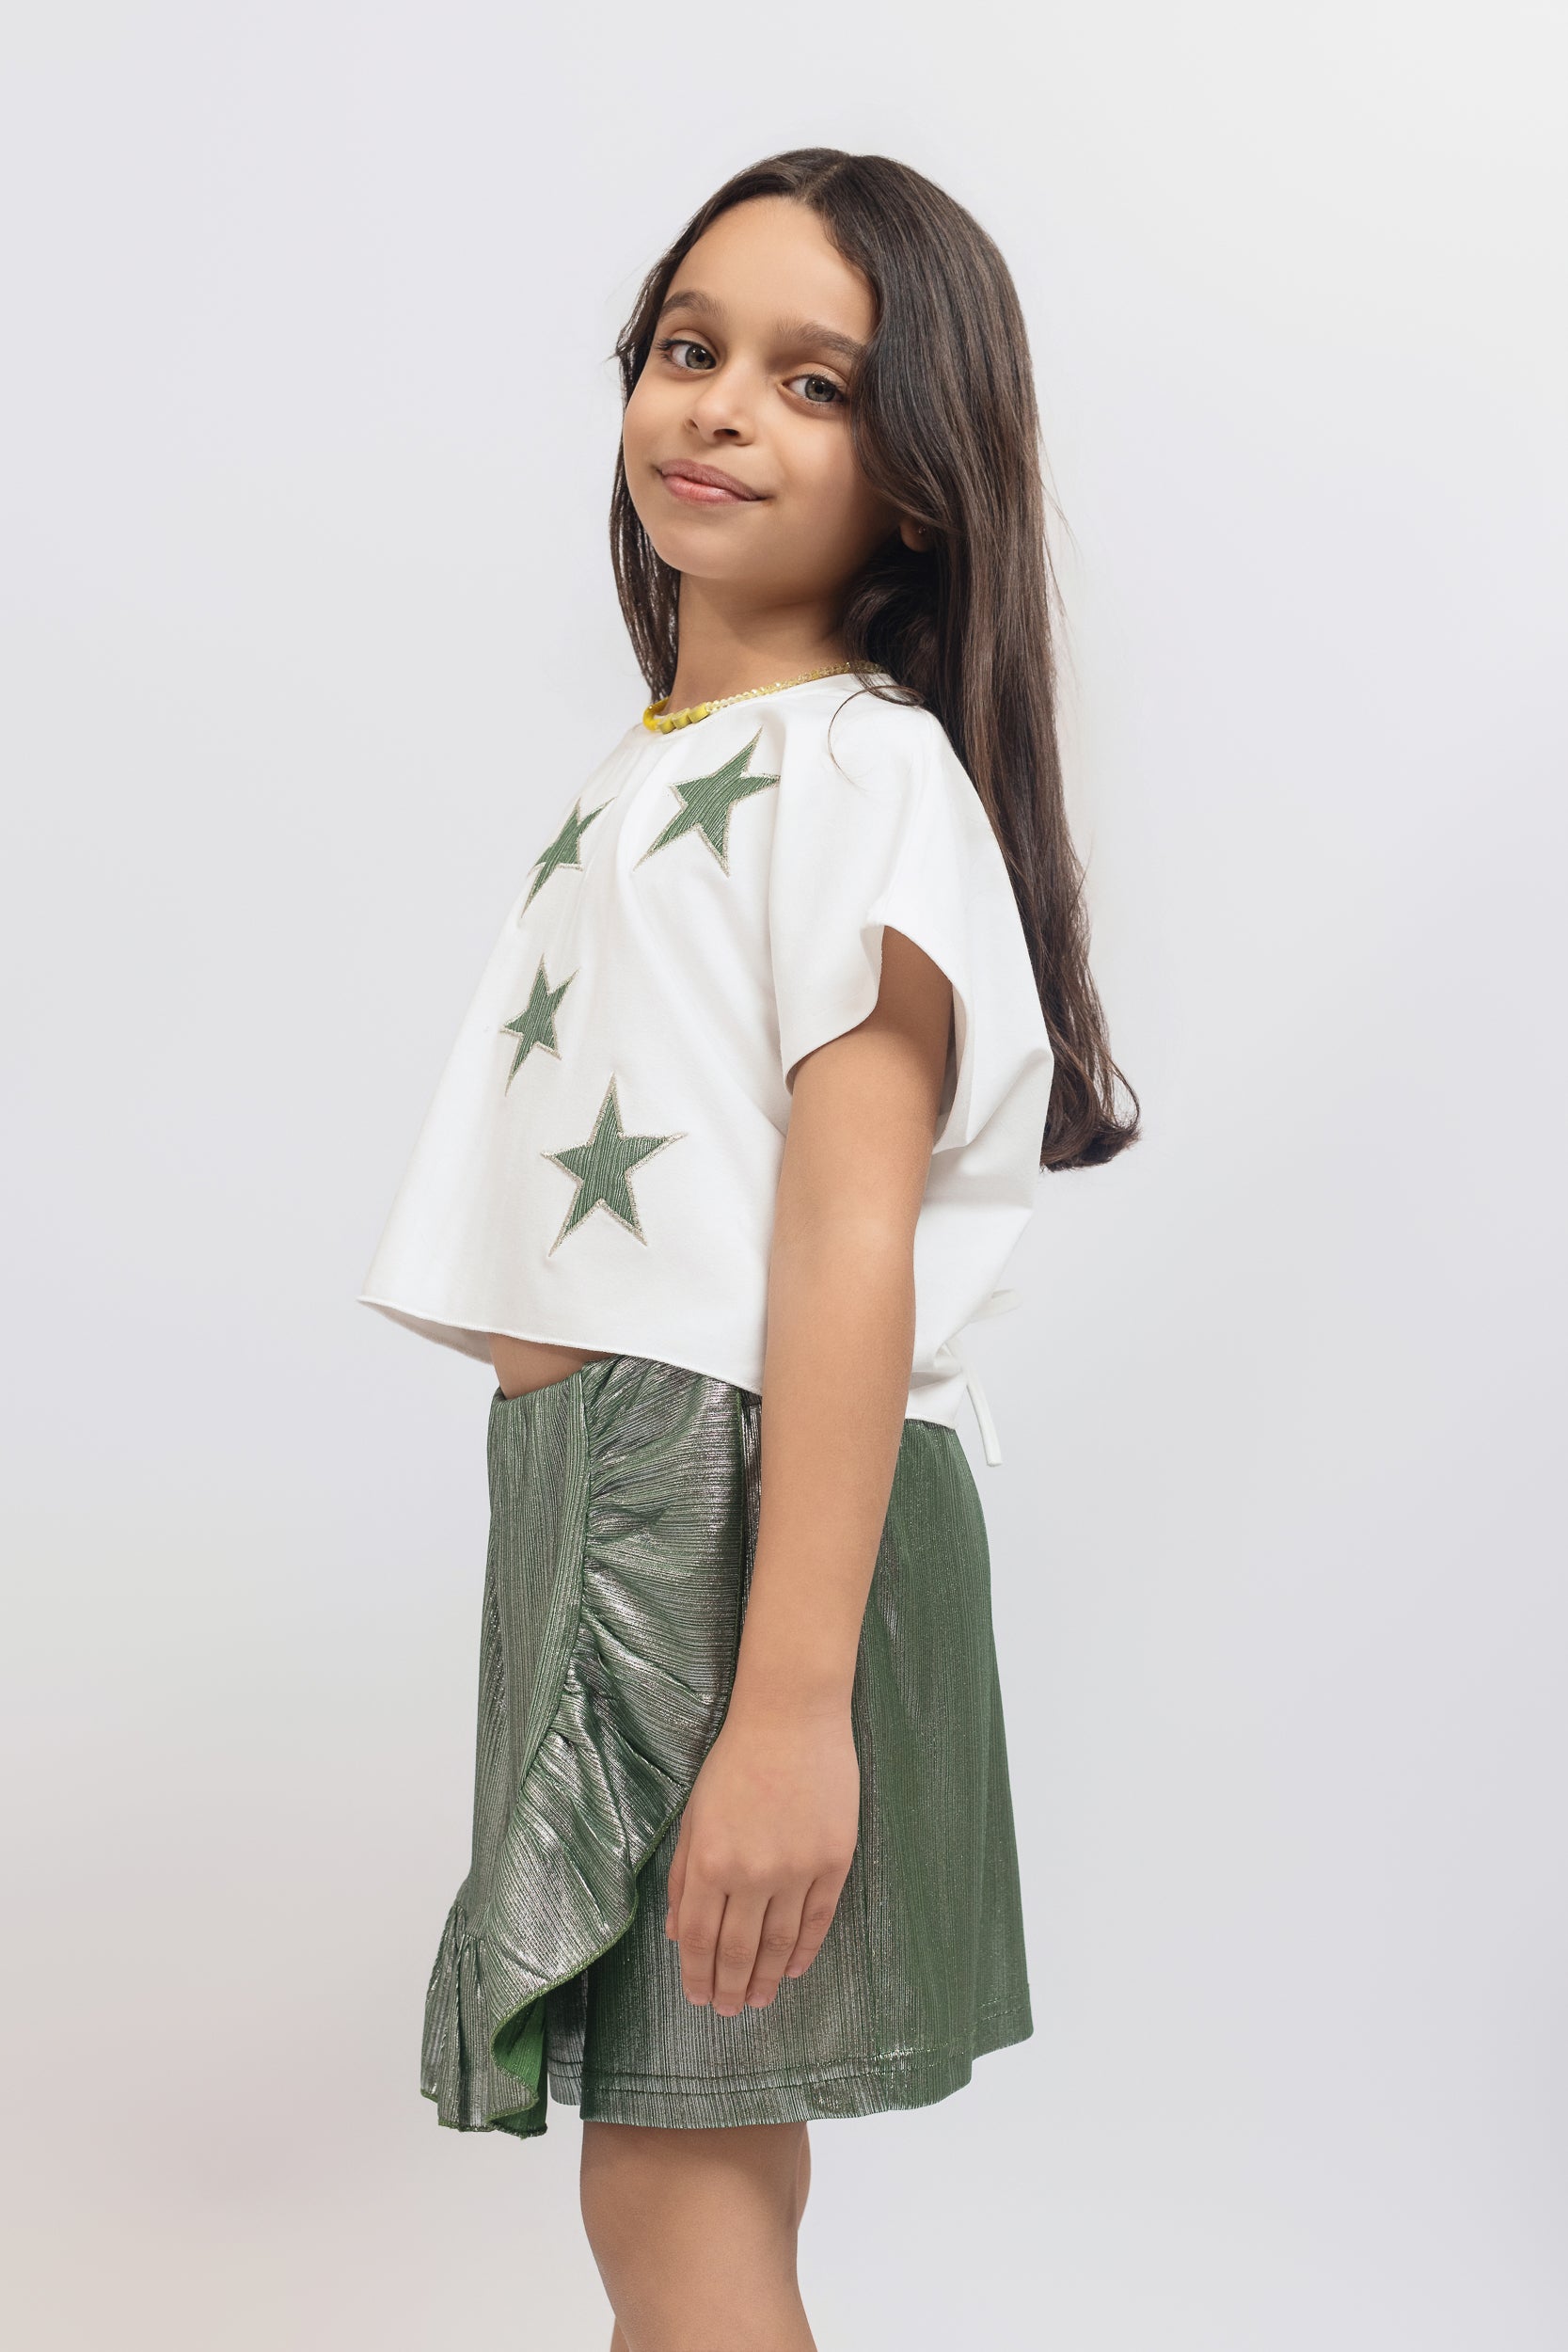 Shiny Star Top For Girls - Off White